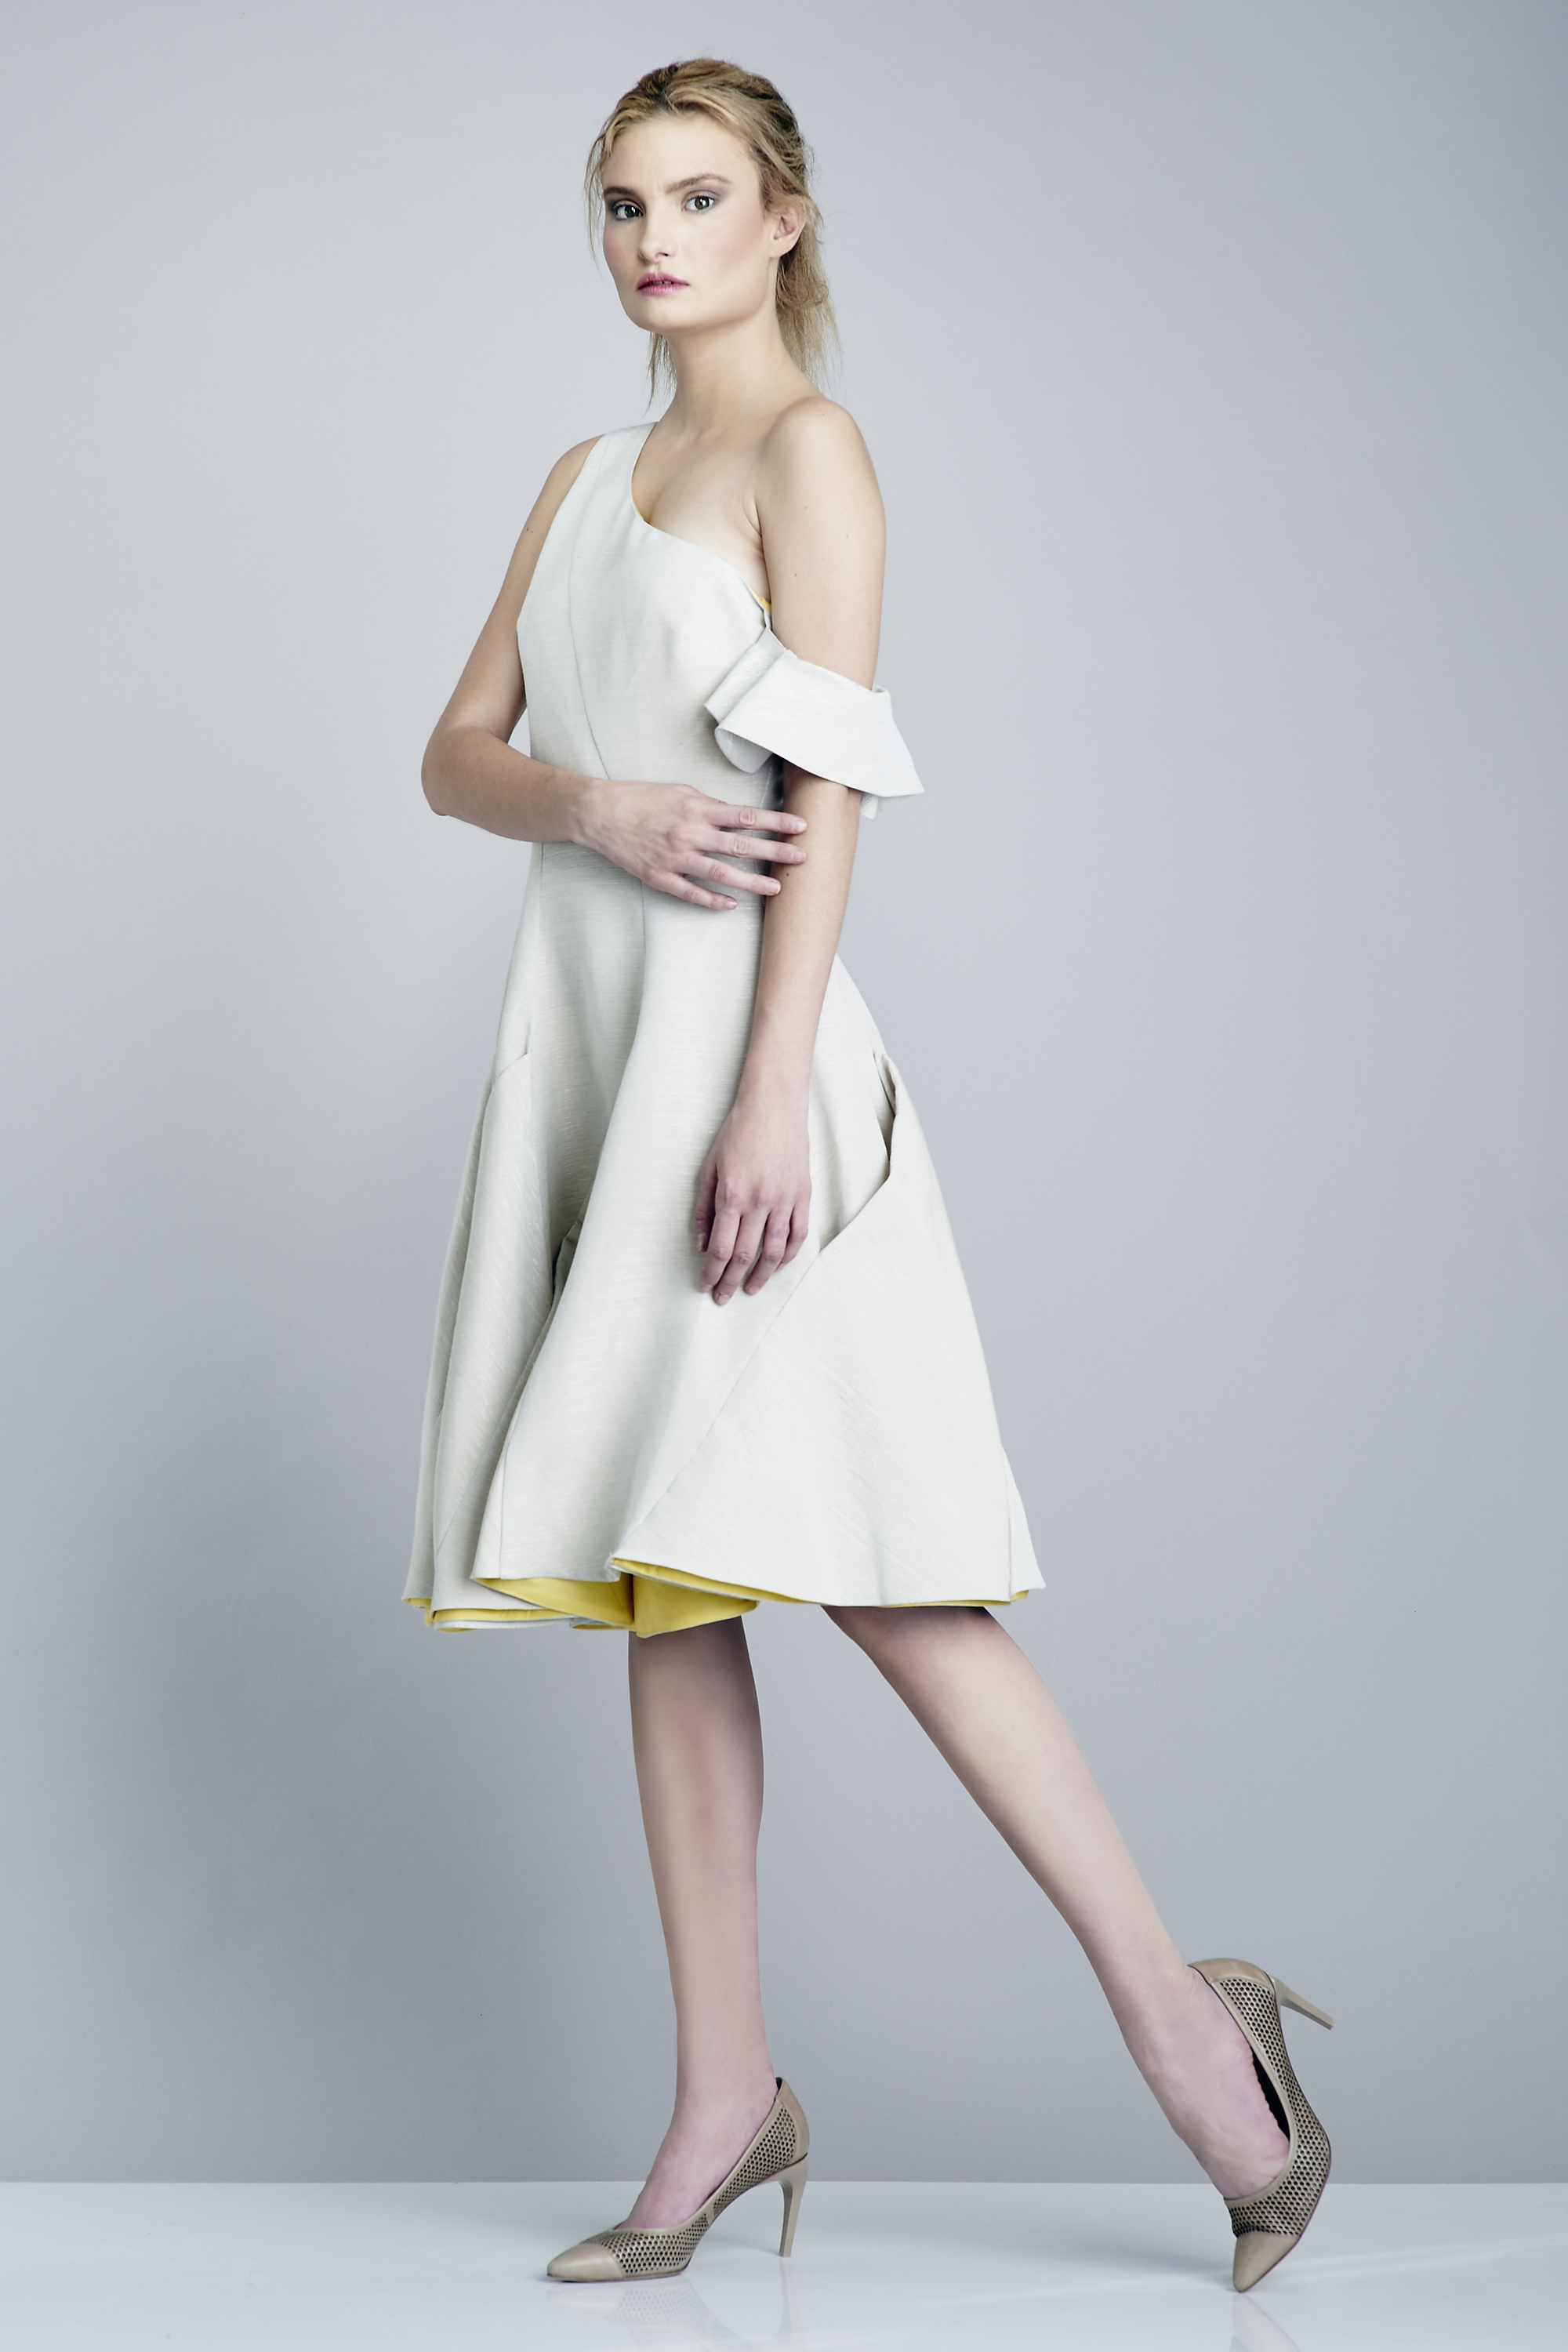 Sophistication as Shown Through Victoria Scandale’s Latest Collection